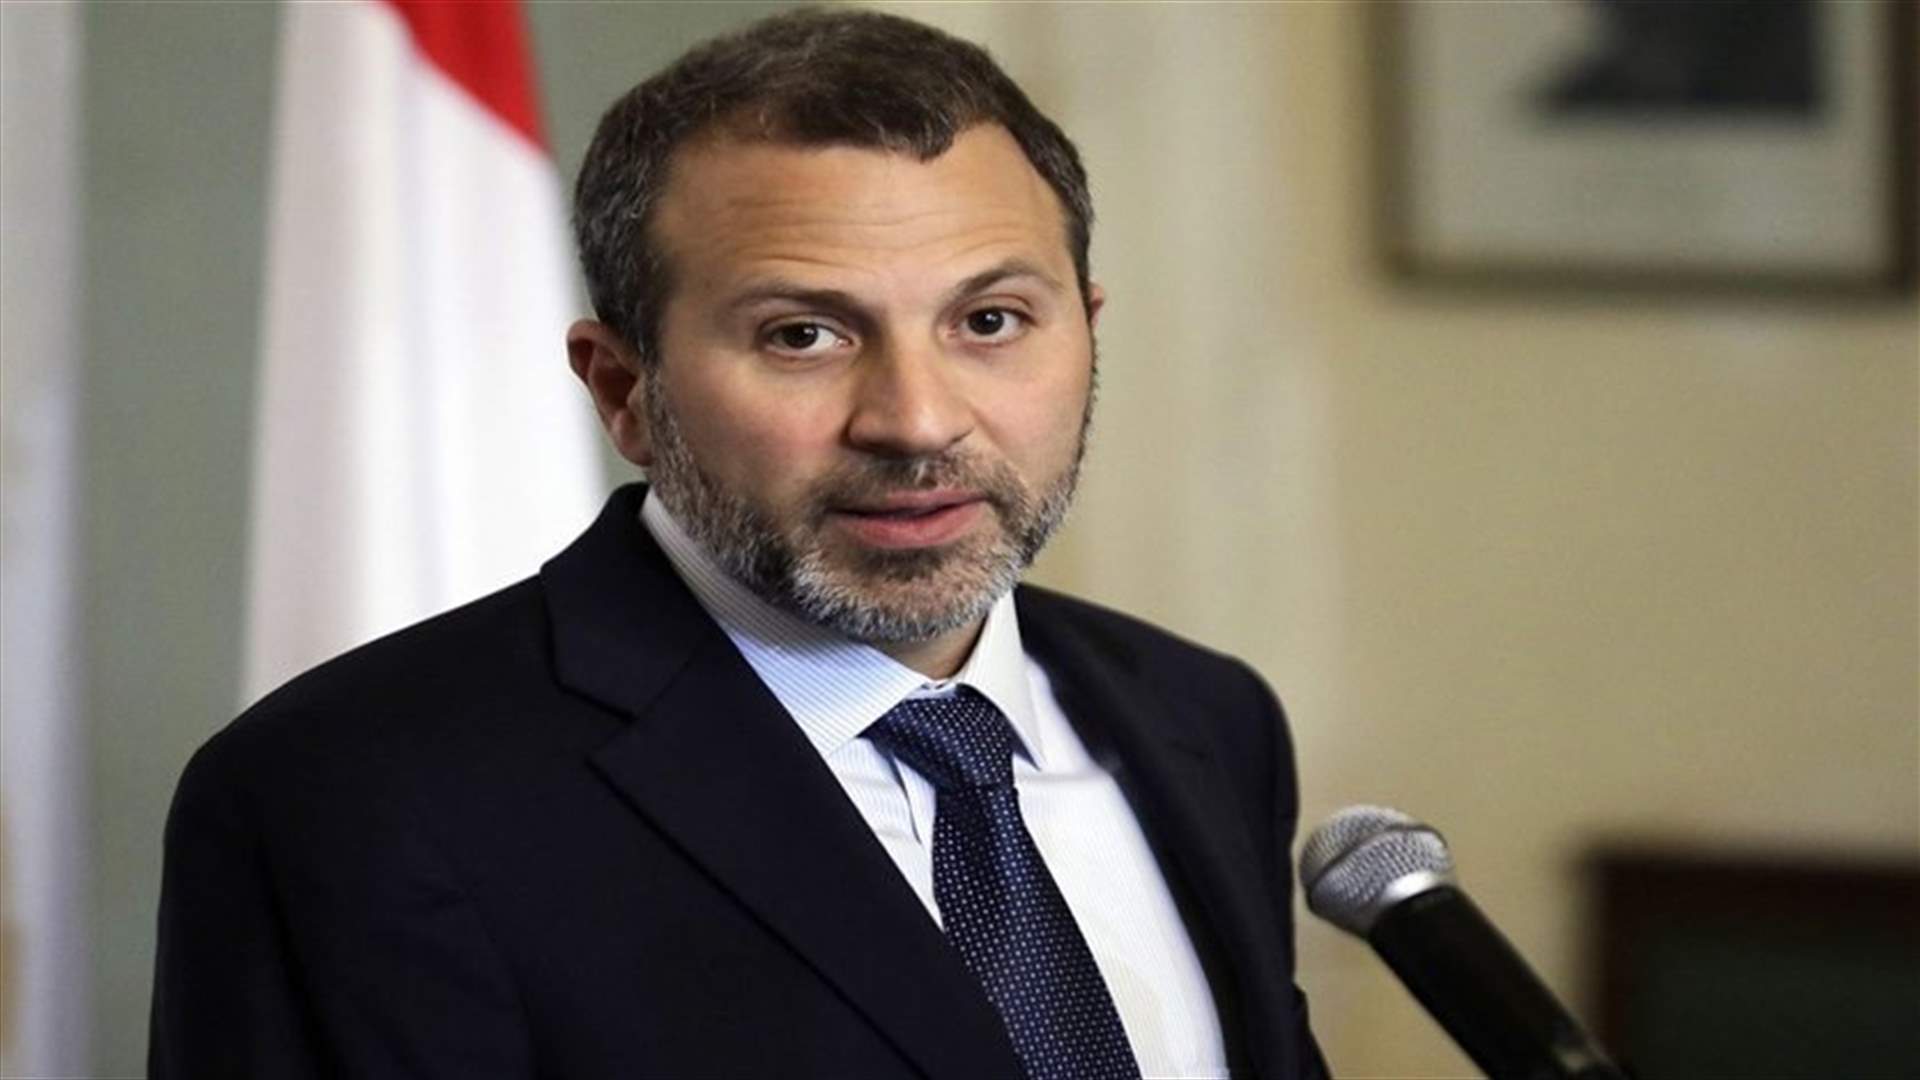 Letter from Bassil to his Emirati counterpart, calls for issuing special pardon for 8 Lebanese detained in UAE